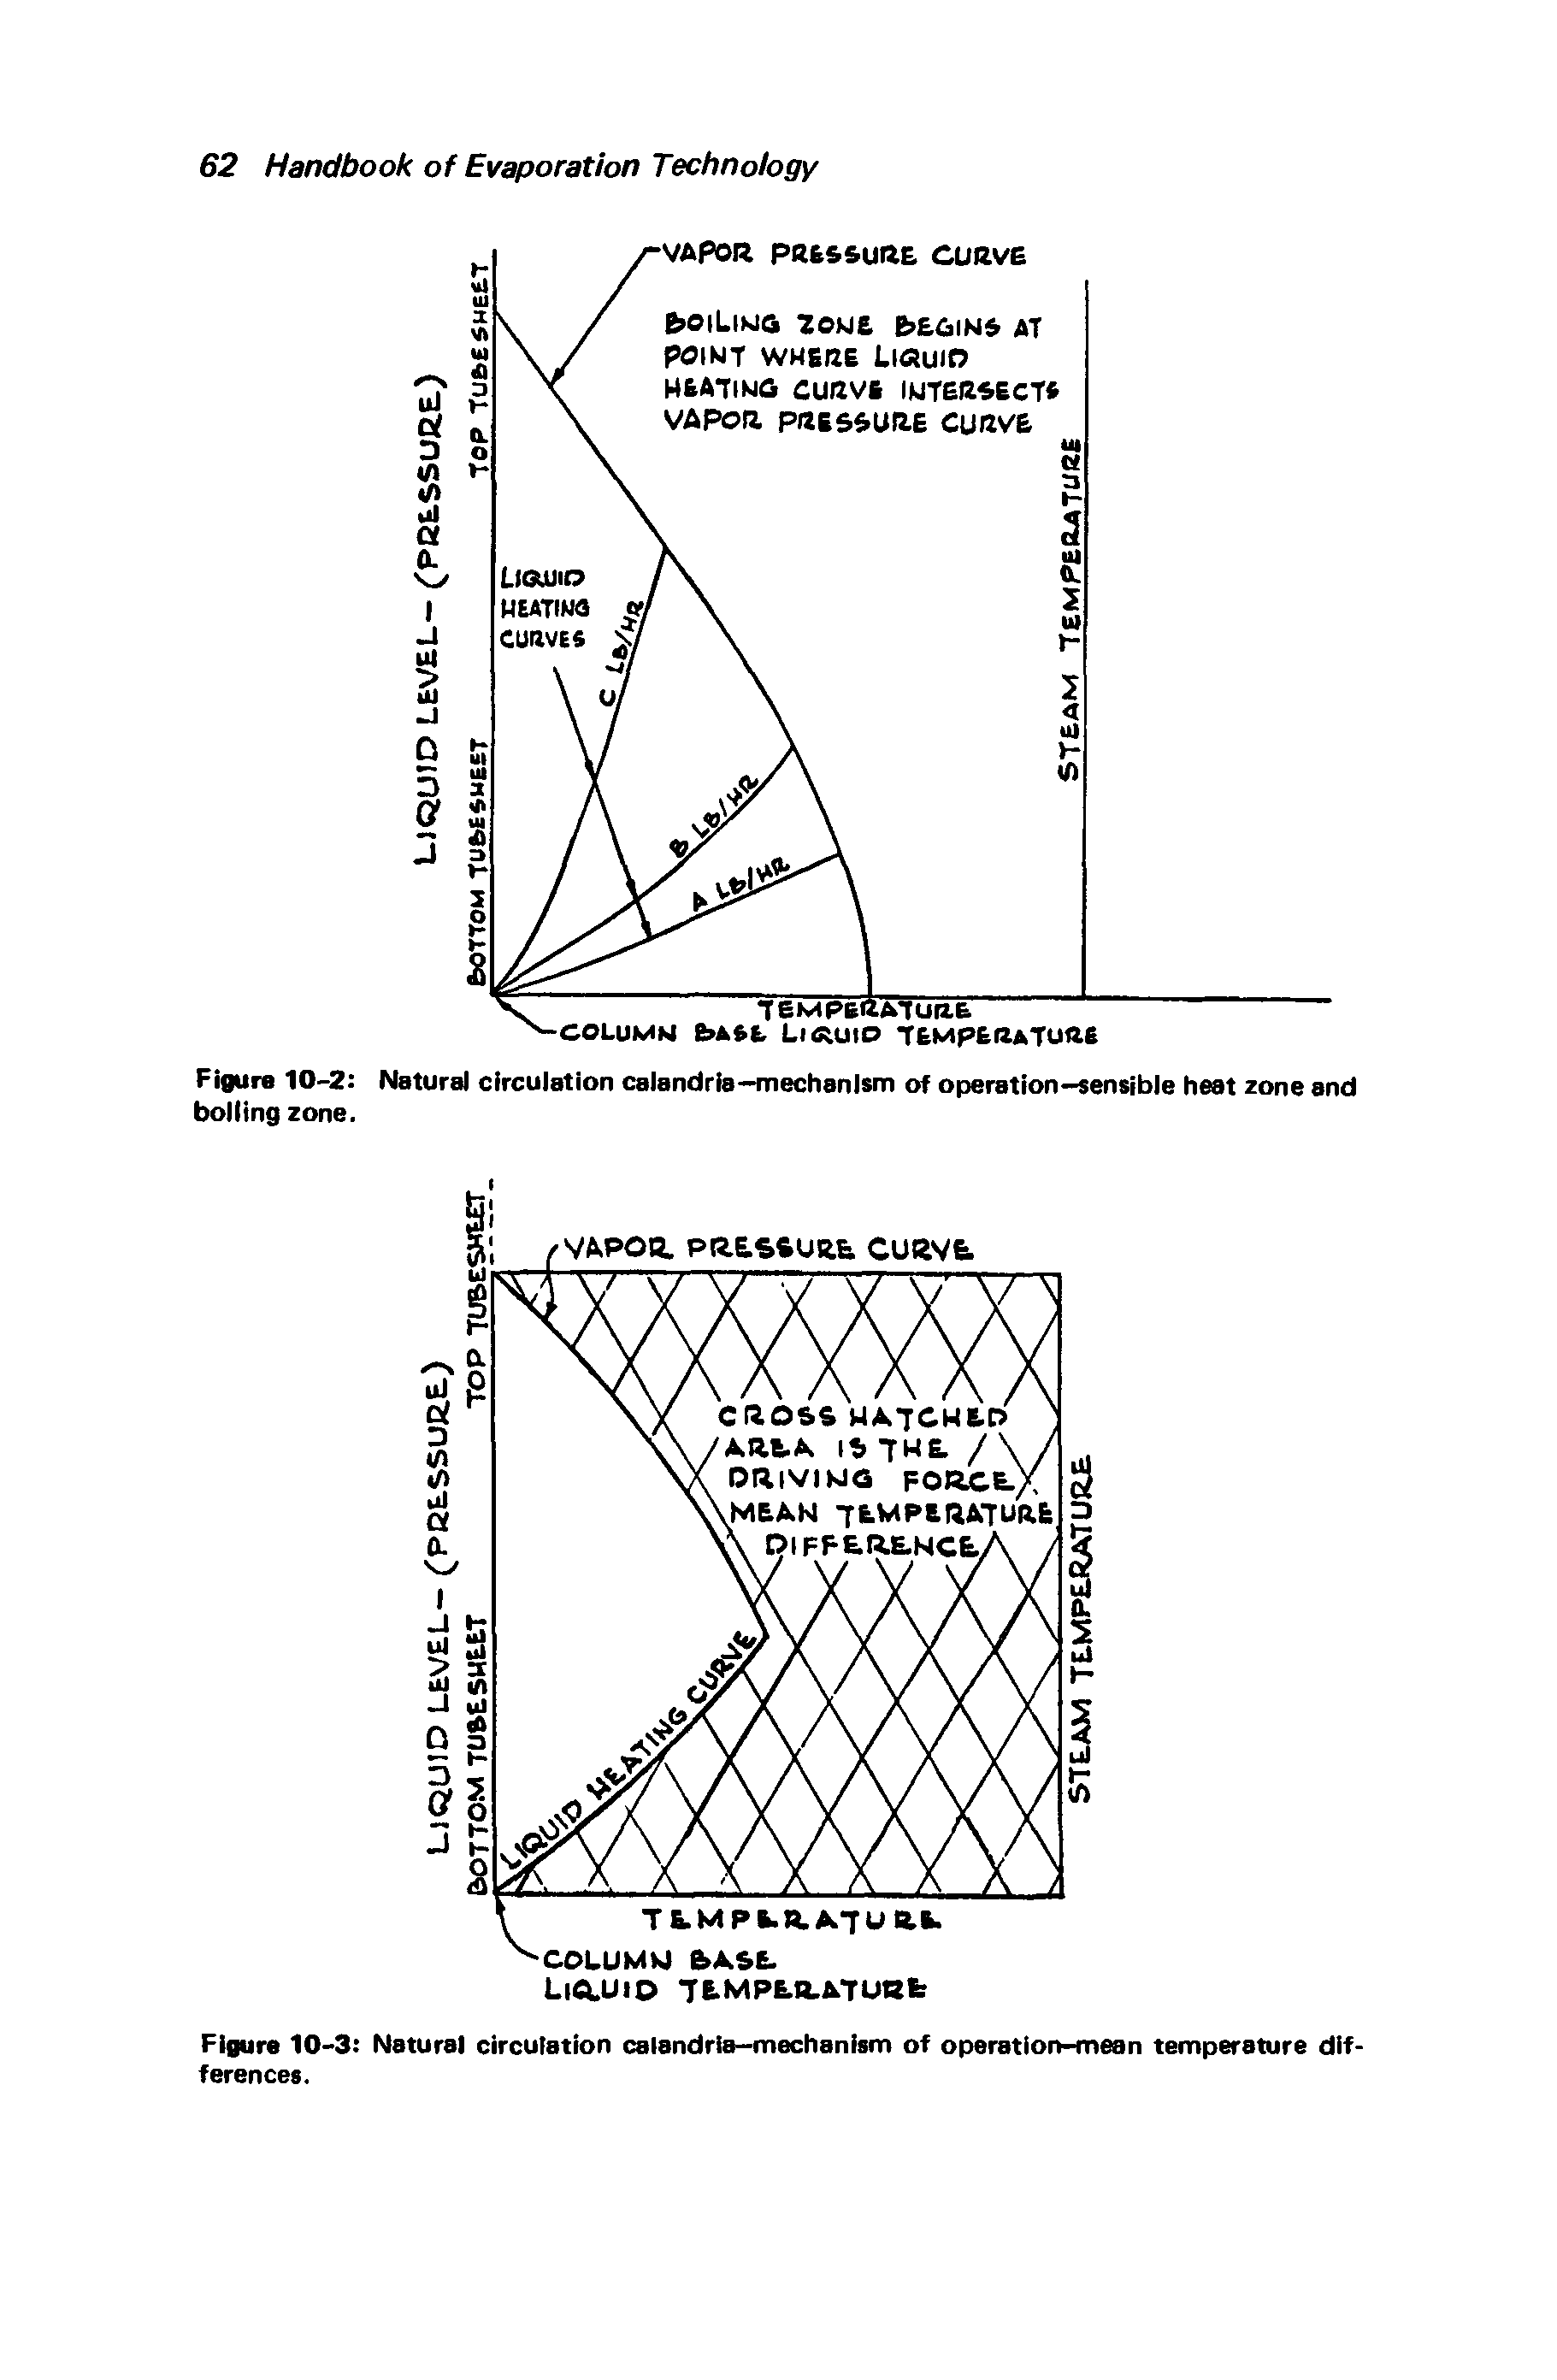 Figure 10-2 Natural circulation calandria-mechanlsm of operation-sensible heat zone and boiling zone.